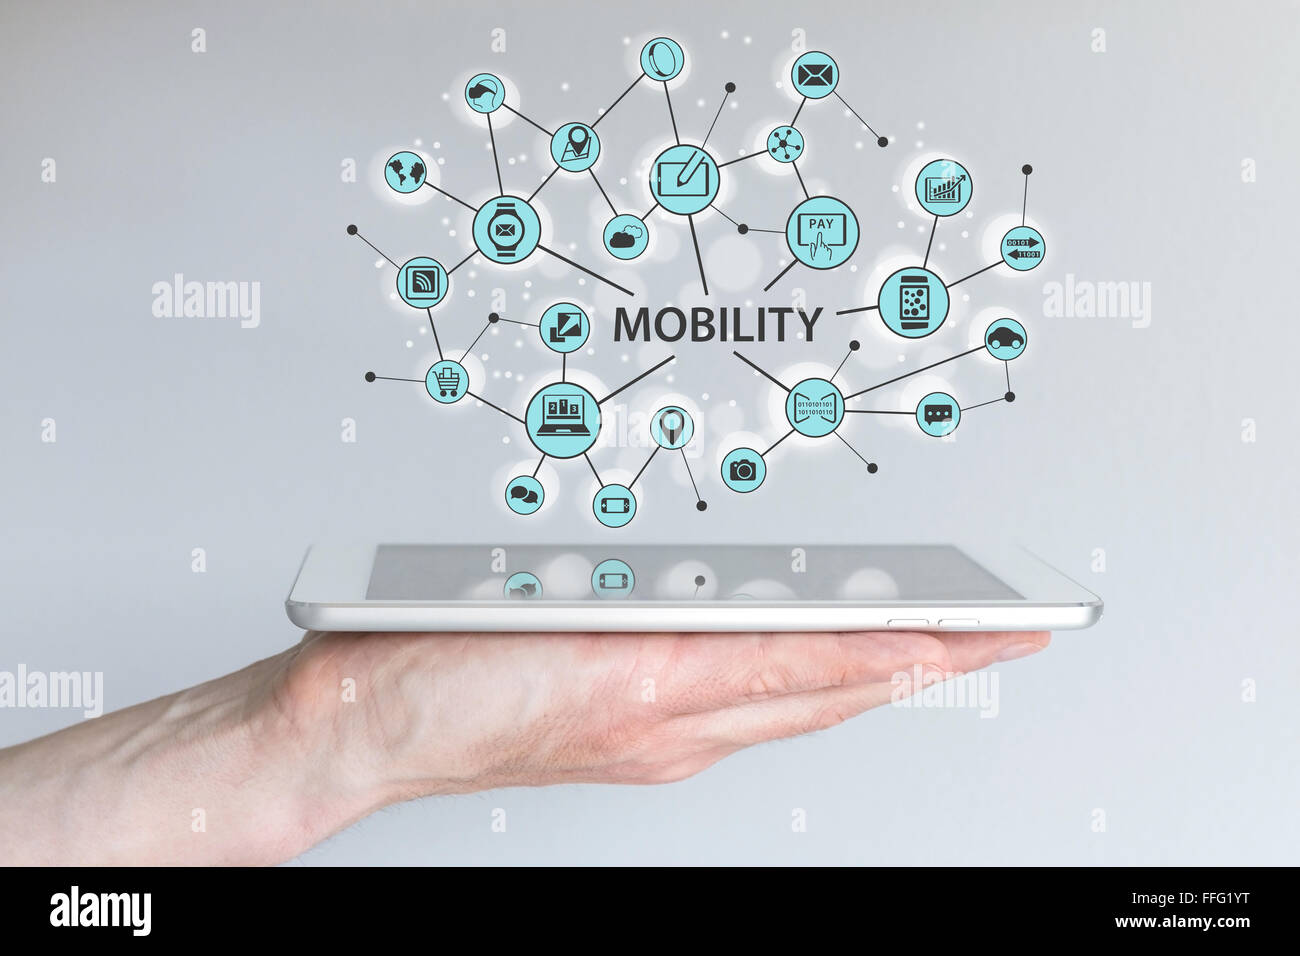 Mobility concept. Male hand holding modern smart phone or tablet with illustration of connected mobile devices. Stock Photo